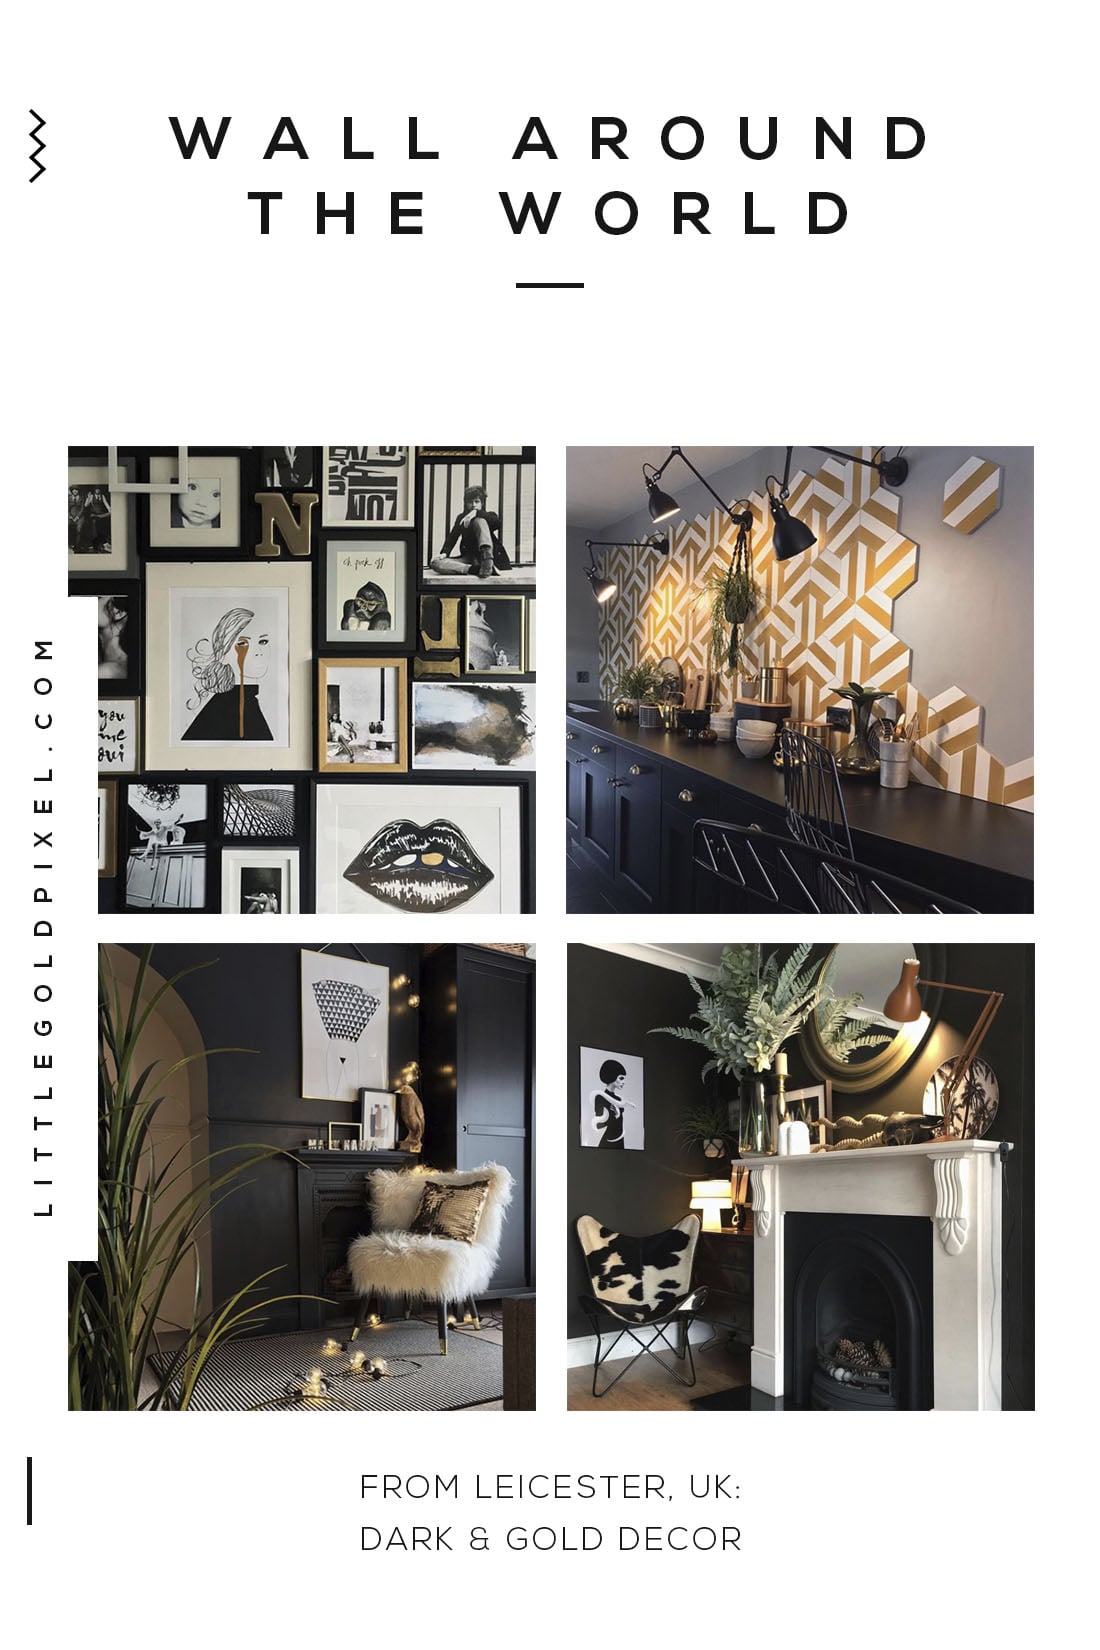 Dark & Gold Gallery Walls • Maximalist Home Tour • Little Gold Pixel • All photos © Nadia @artynads #maximalist #decor #glam #modern #dark #gold #homedecor #gallerywalls